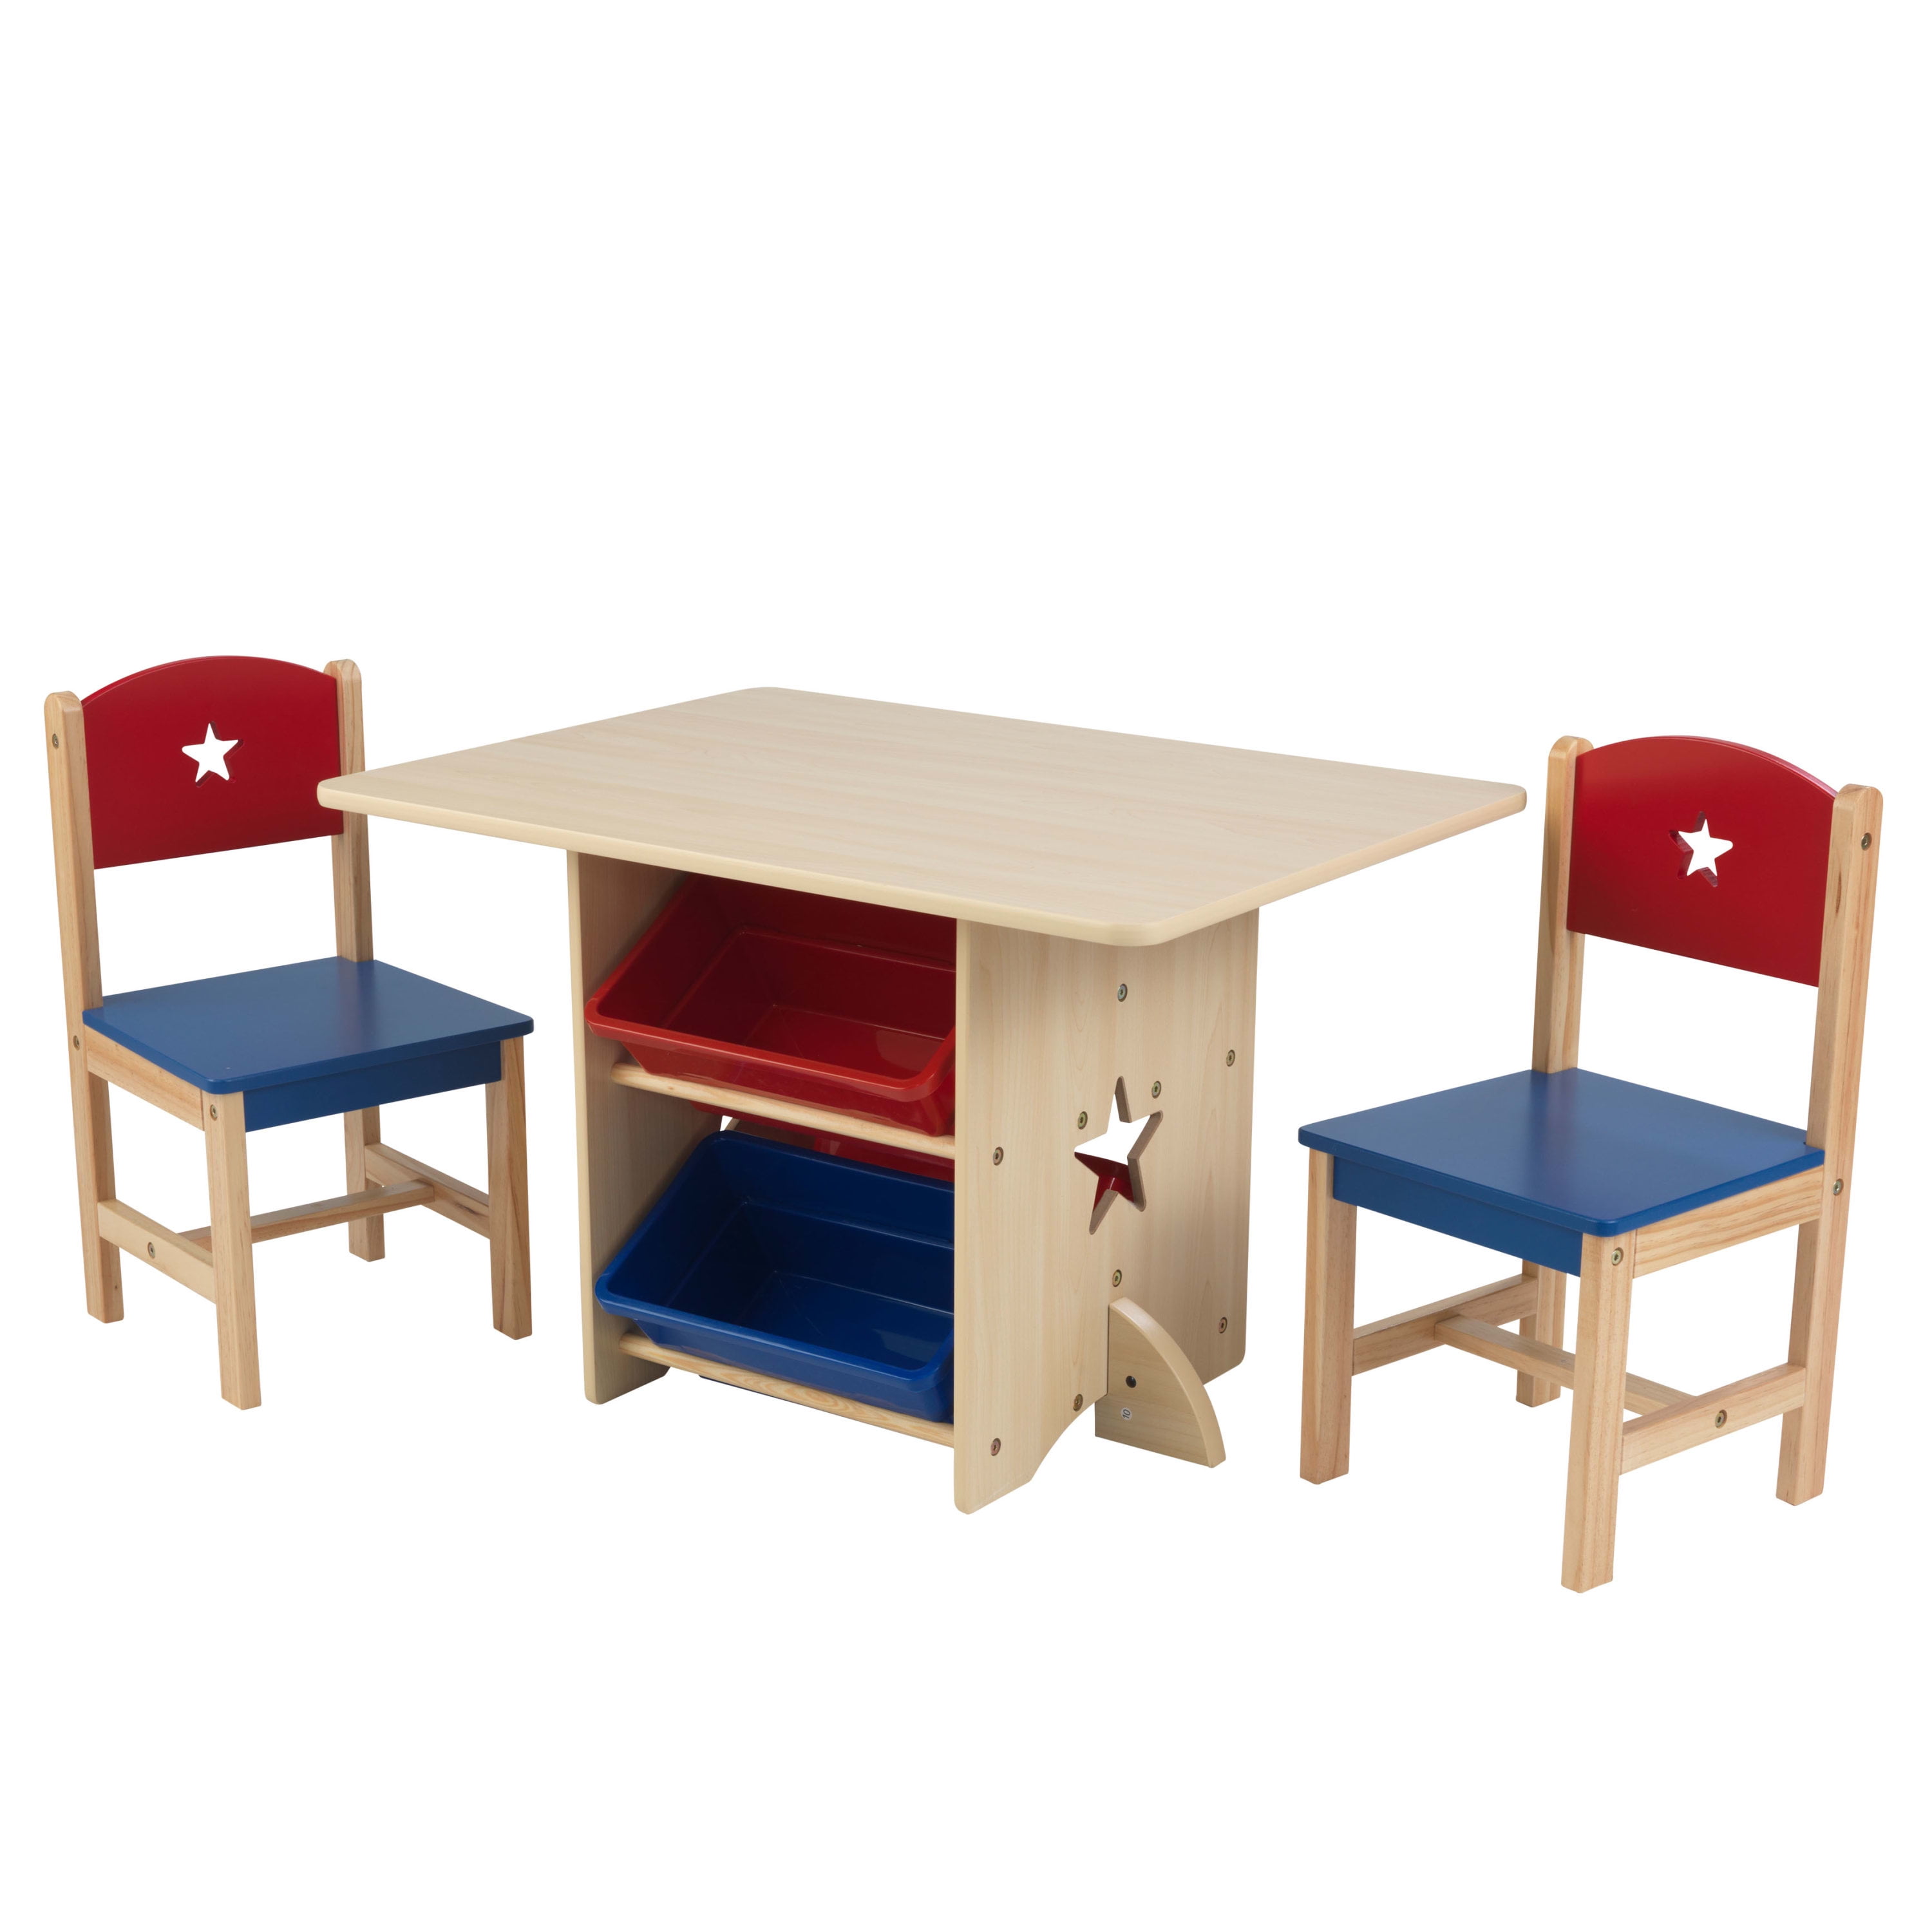 2 in 1 Toddler Craft Play Wood Activity Desk w/2 Chairs Sale